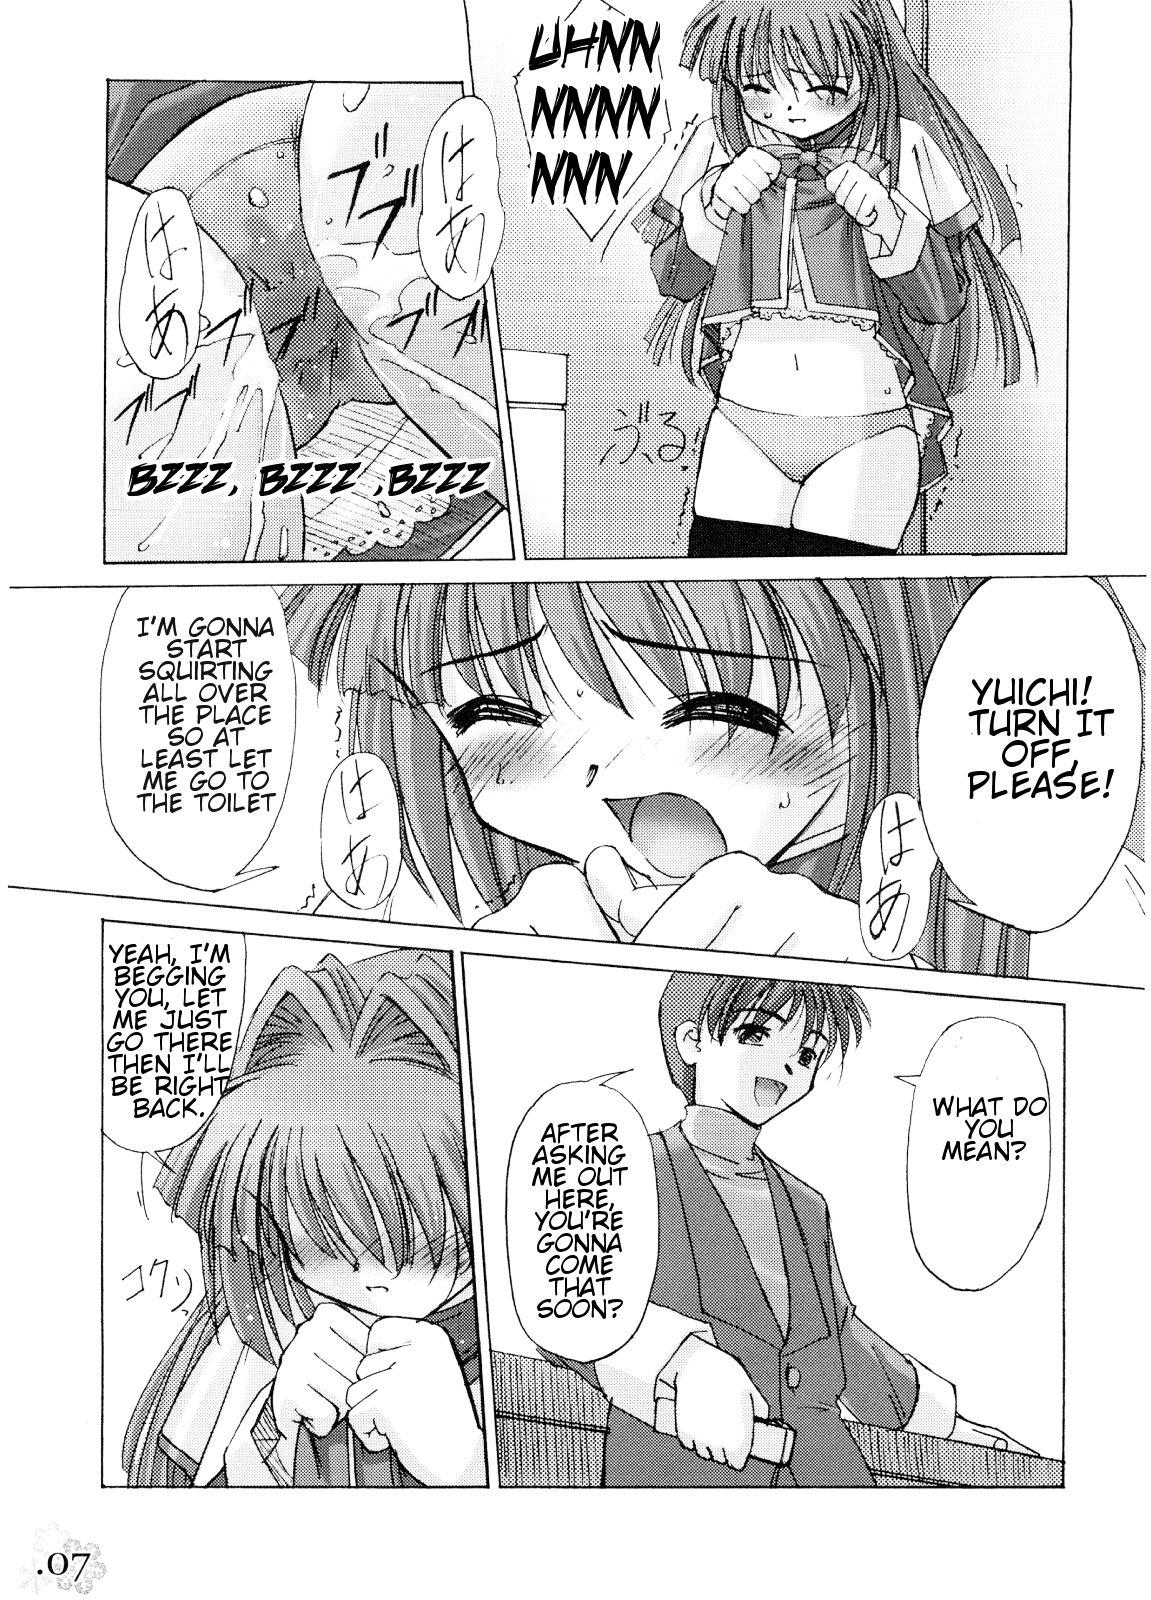 You Are The Only Version: Kanon Part 2 3